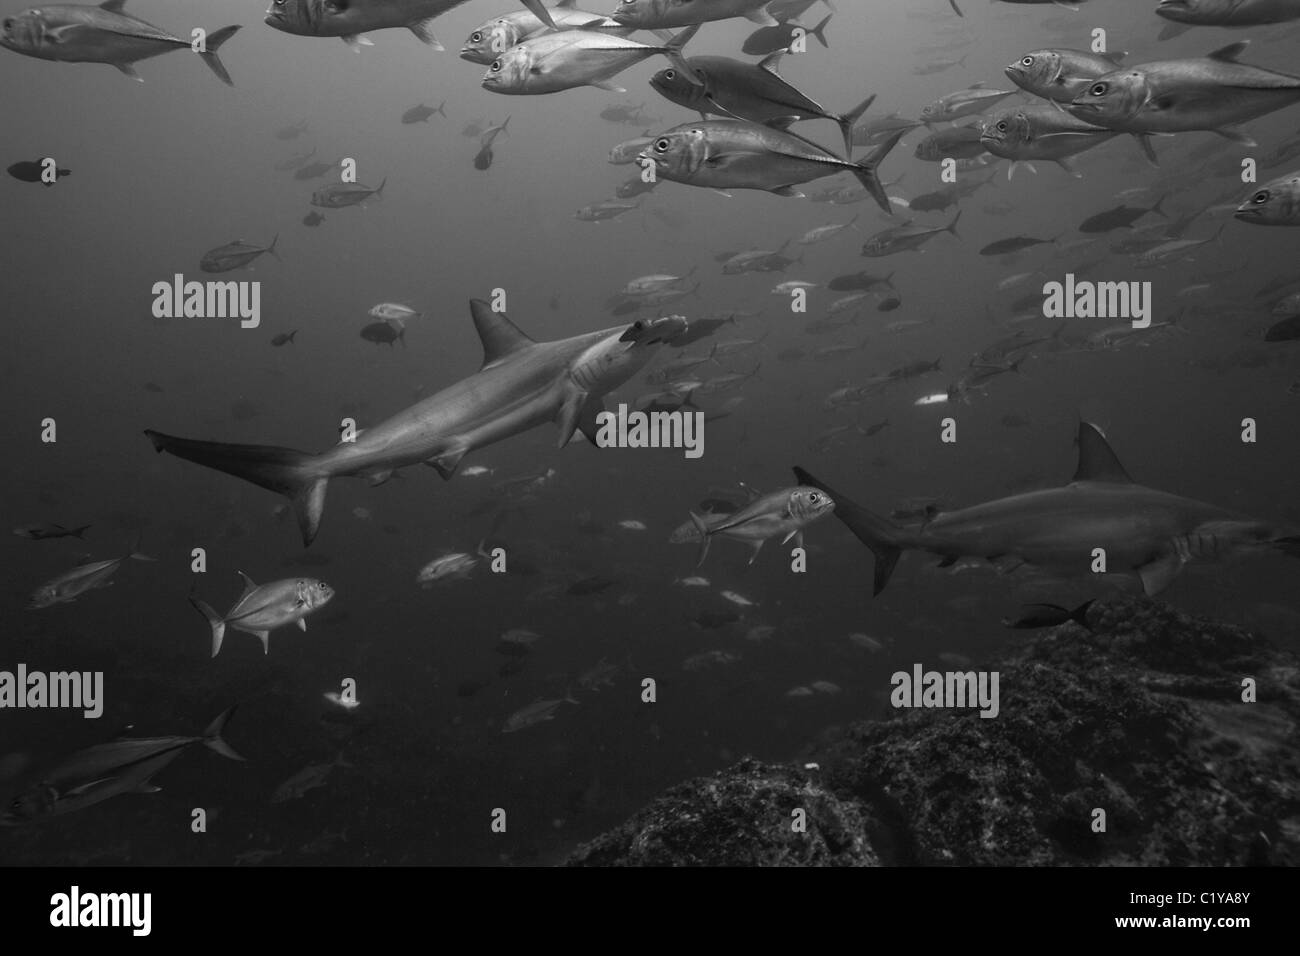 Hammerhead sharks school Black and White Stock Photos & Images - Alamy